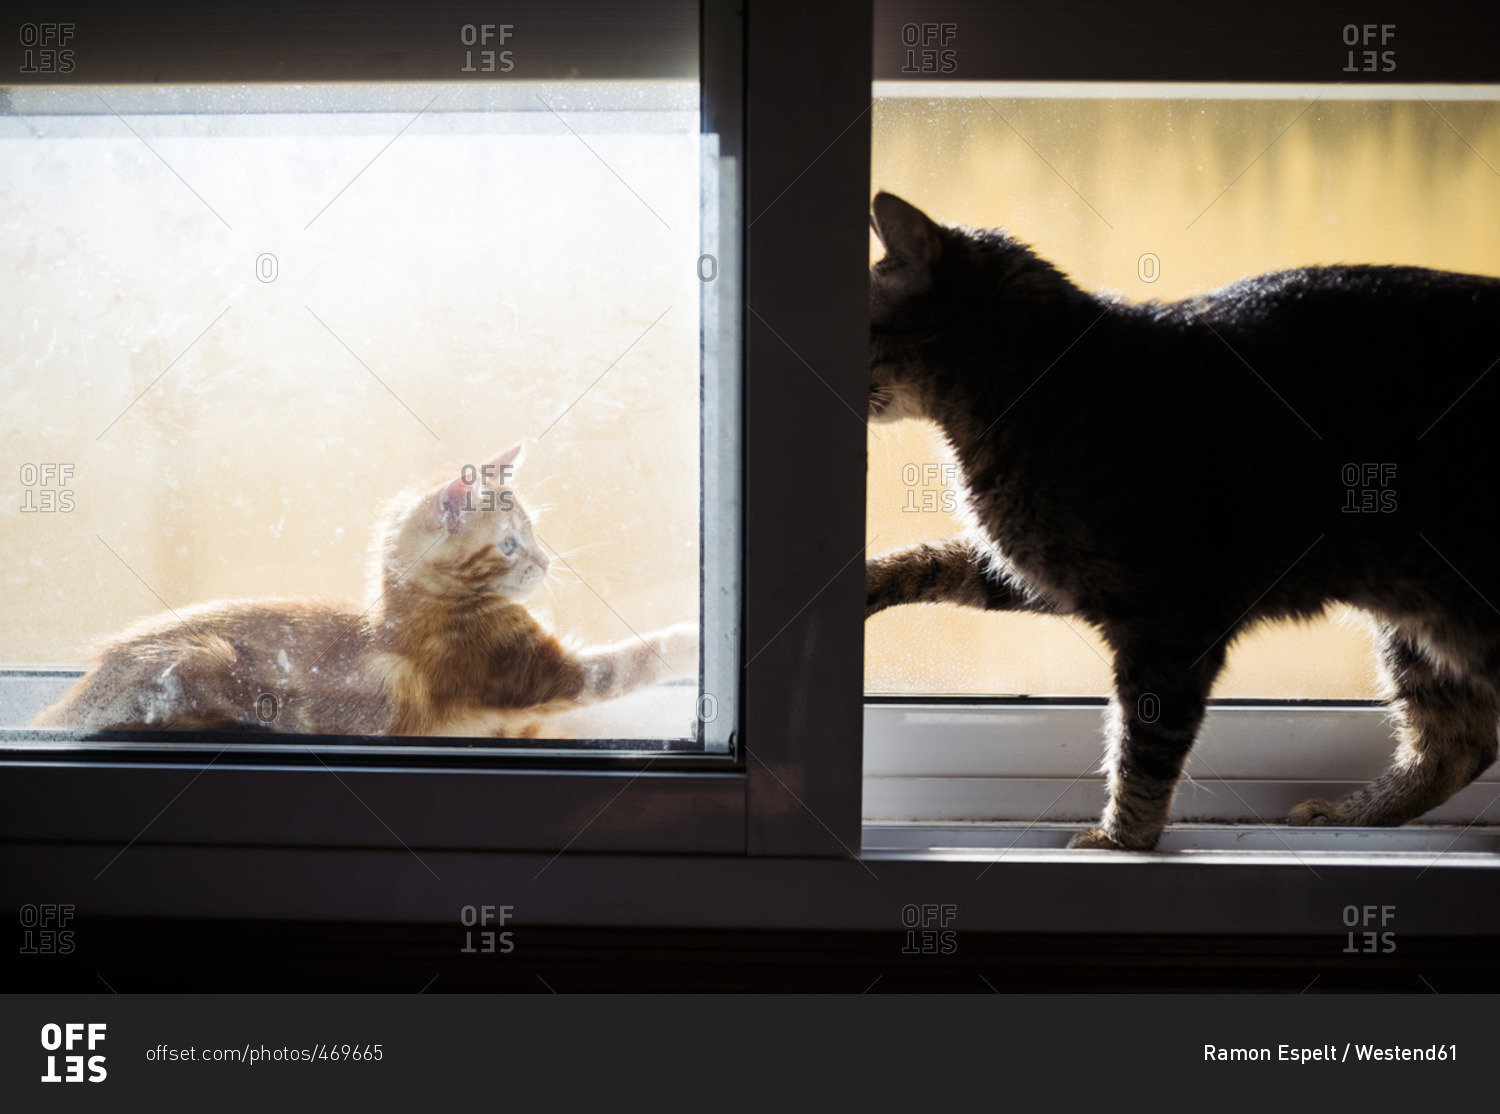 Kitten and adult cat playfighting on window sill